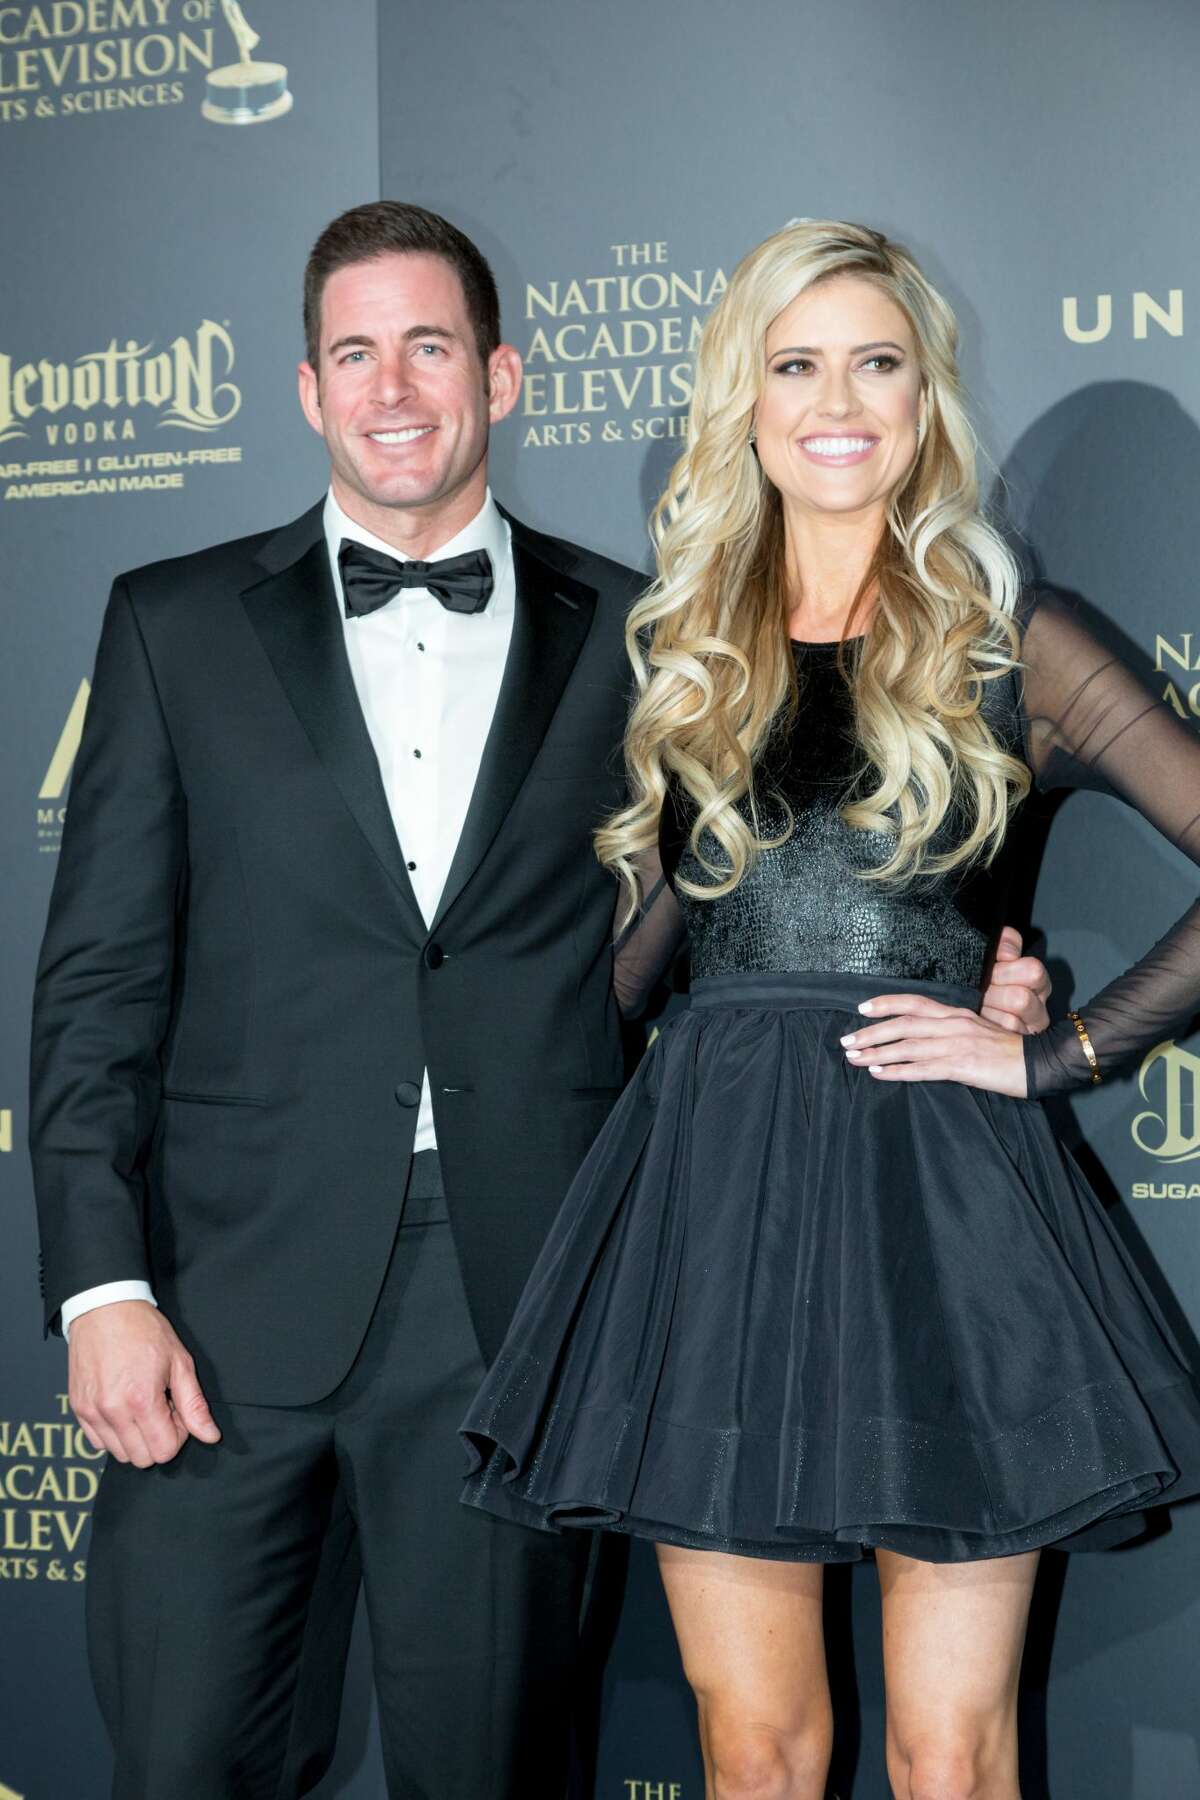 "Flip or Flop" According to reports, a North Carolina man, and ex-employee sued “Flip or Flop” stars Christina and Tarek El Moussa for more than $37,000. The plaintiff claims he is owed commissions and back wages of 1,280 hours of work he did for the couple's company Next Level Property. The plaintiff also claimed that the El Moussas blocked his Facebook page, email address and phone number to avoid paying up. 